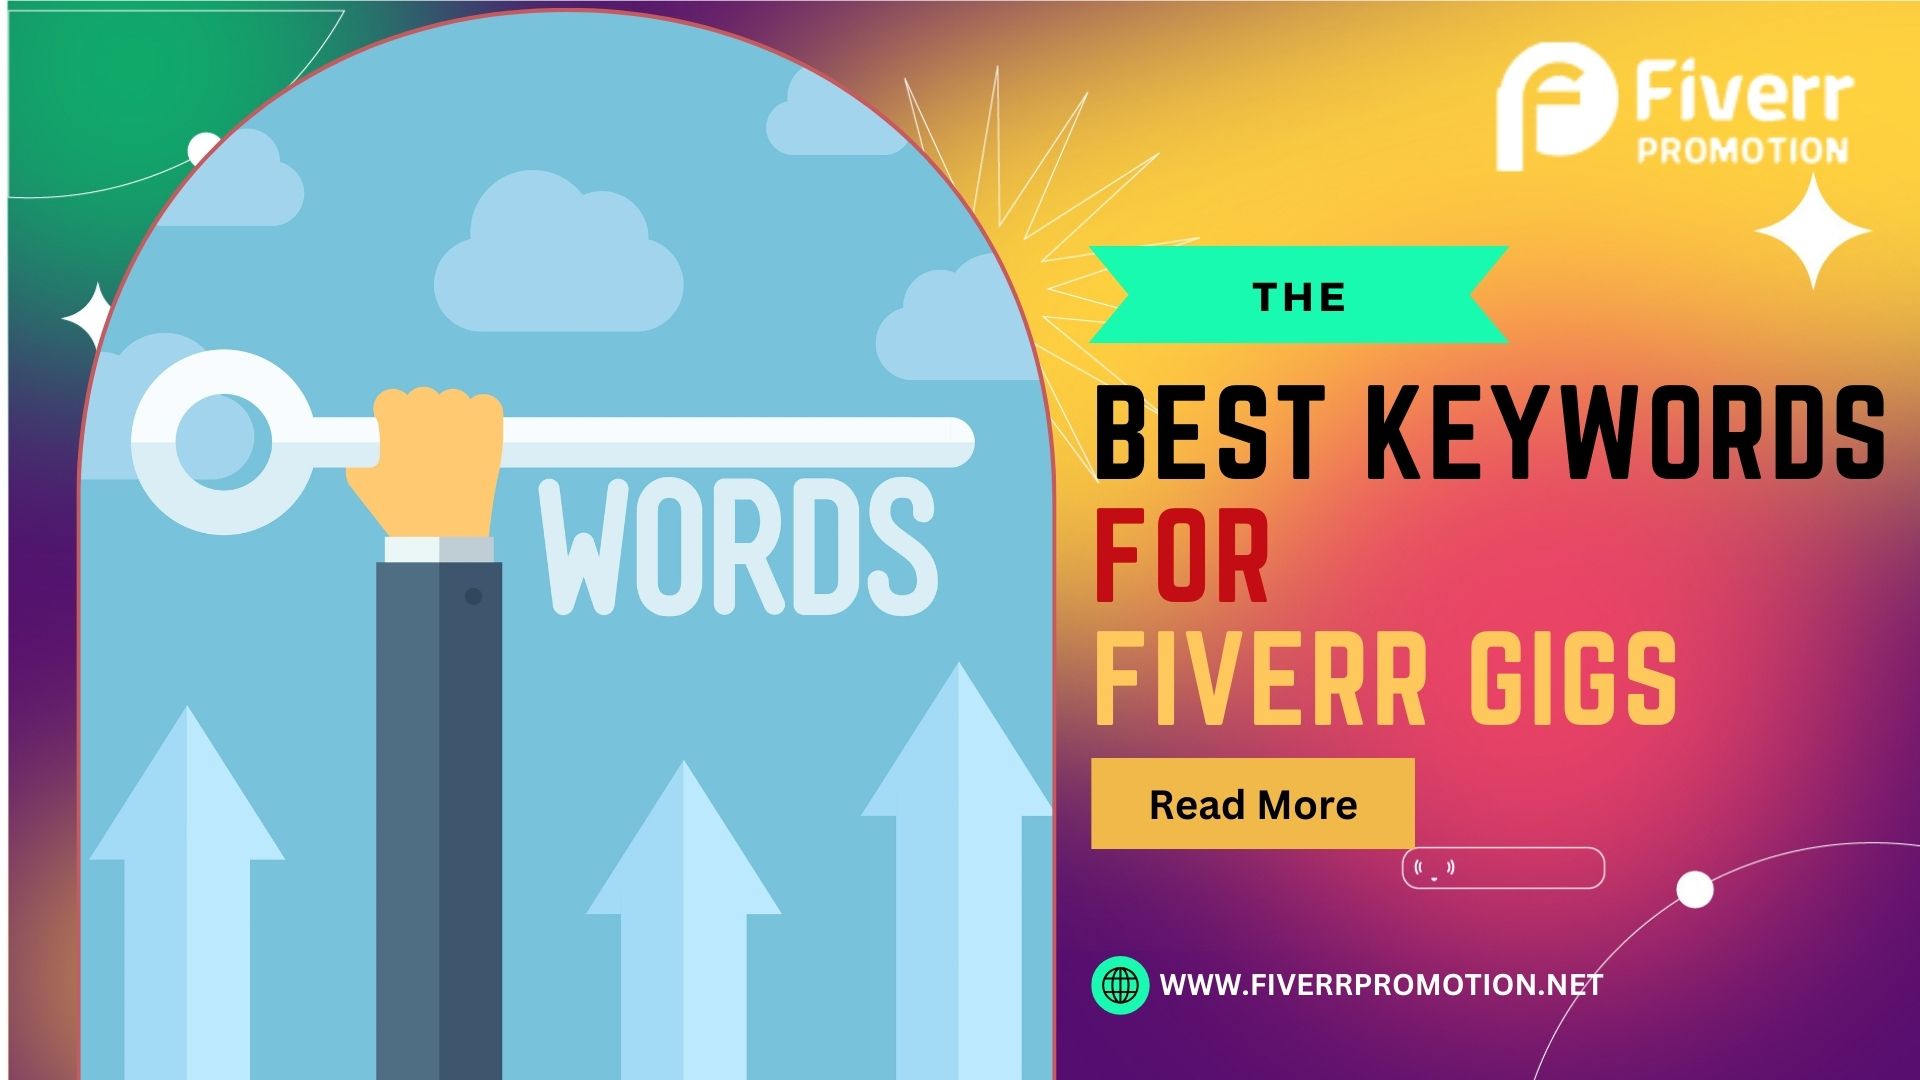 The best keywords for Fiverr gigs